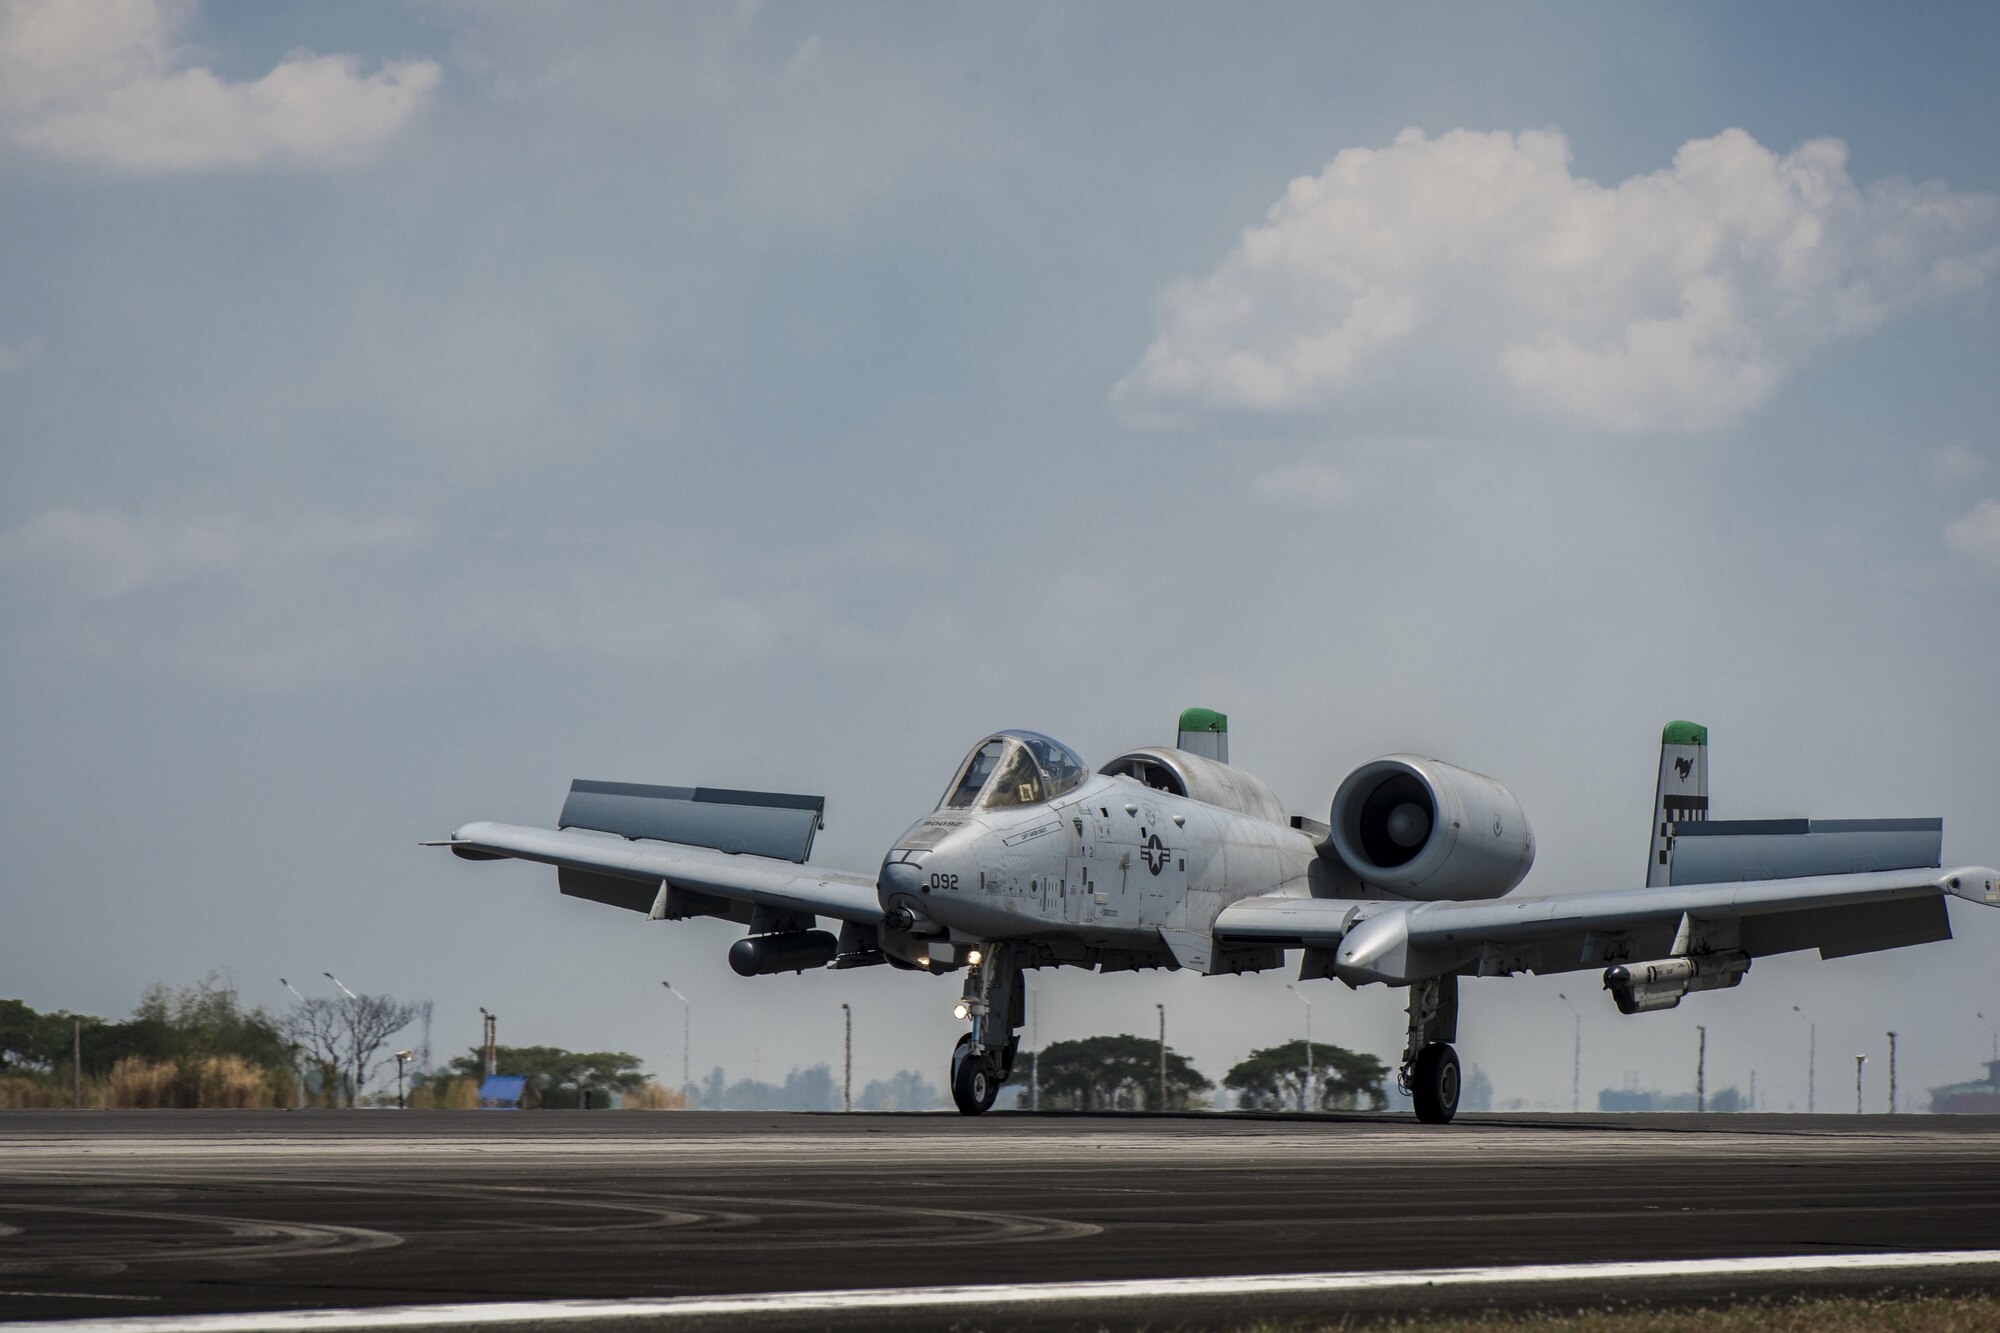 A U.S. Air Force A-10C Thunderbolt II, with the 51st Fighter Wing, Osan Air Base, Republic of Korea, touches down at Clark Air Base, Philippines, April 19, 2016, after returning from its first operational mission through international airspace providing air and maritime situational awareness. The A-10C’s mission enhances U.S. military assets in the region upholding freedom of navigation and over flight. The five A-10Cs are joined with three HH-60G Pave Hawks and approximately 200 personnel deployed from multiple Pacific Air Forces units to make up the first iteration of the U.S. Pacific Command Air Contingent at Clark Air Base, Philippines. (U.S. Air Force photo by Staff Sgt. Benjamin W. Stratton)